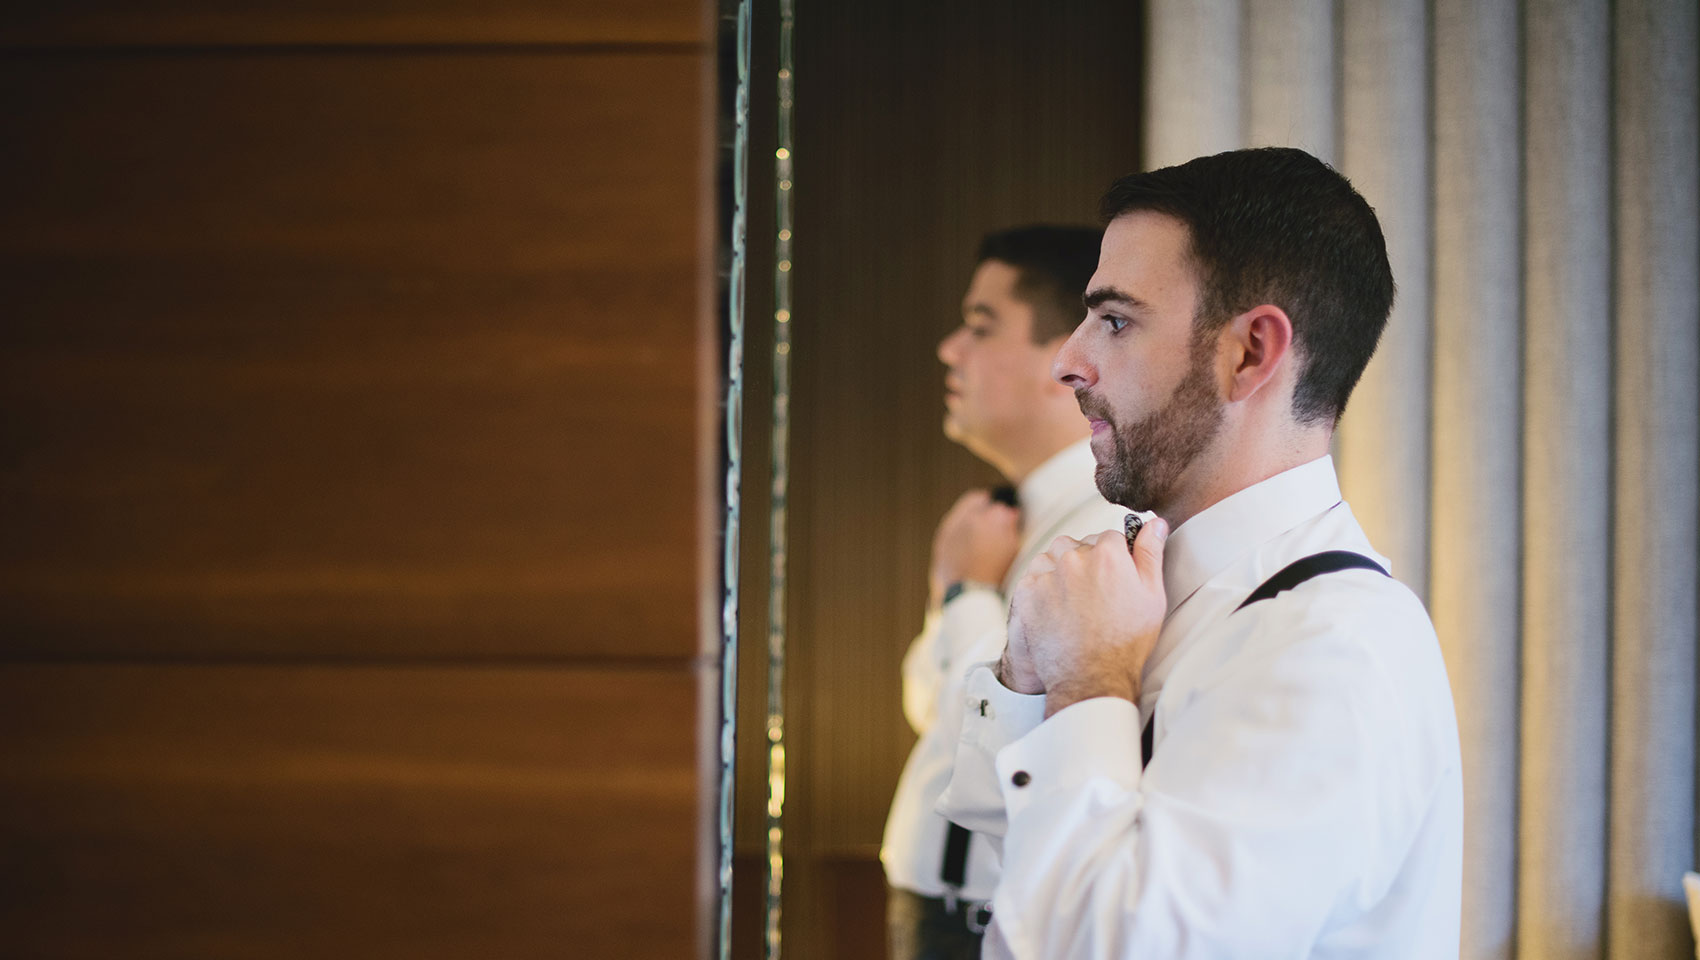 Groom adjusting his bowtie in the mirror on his wedding day